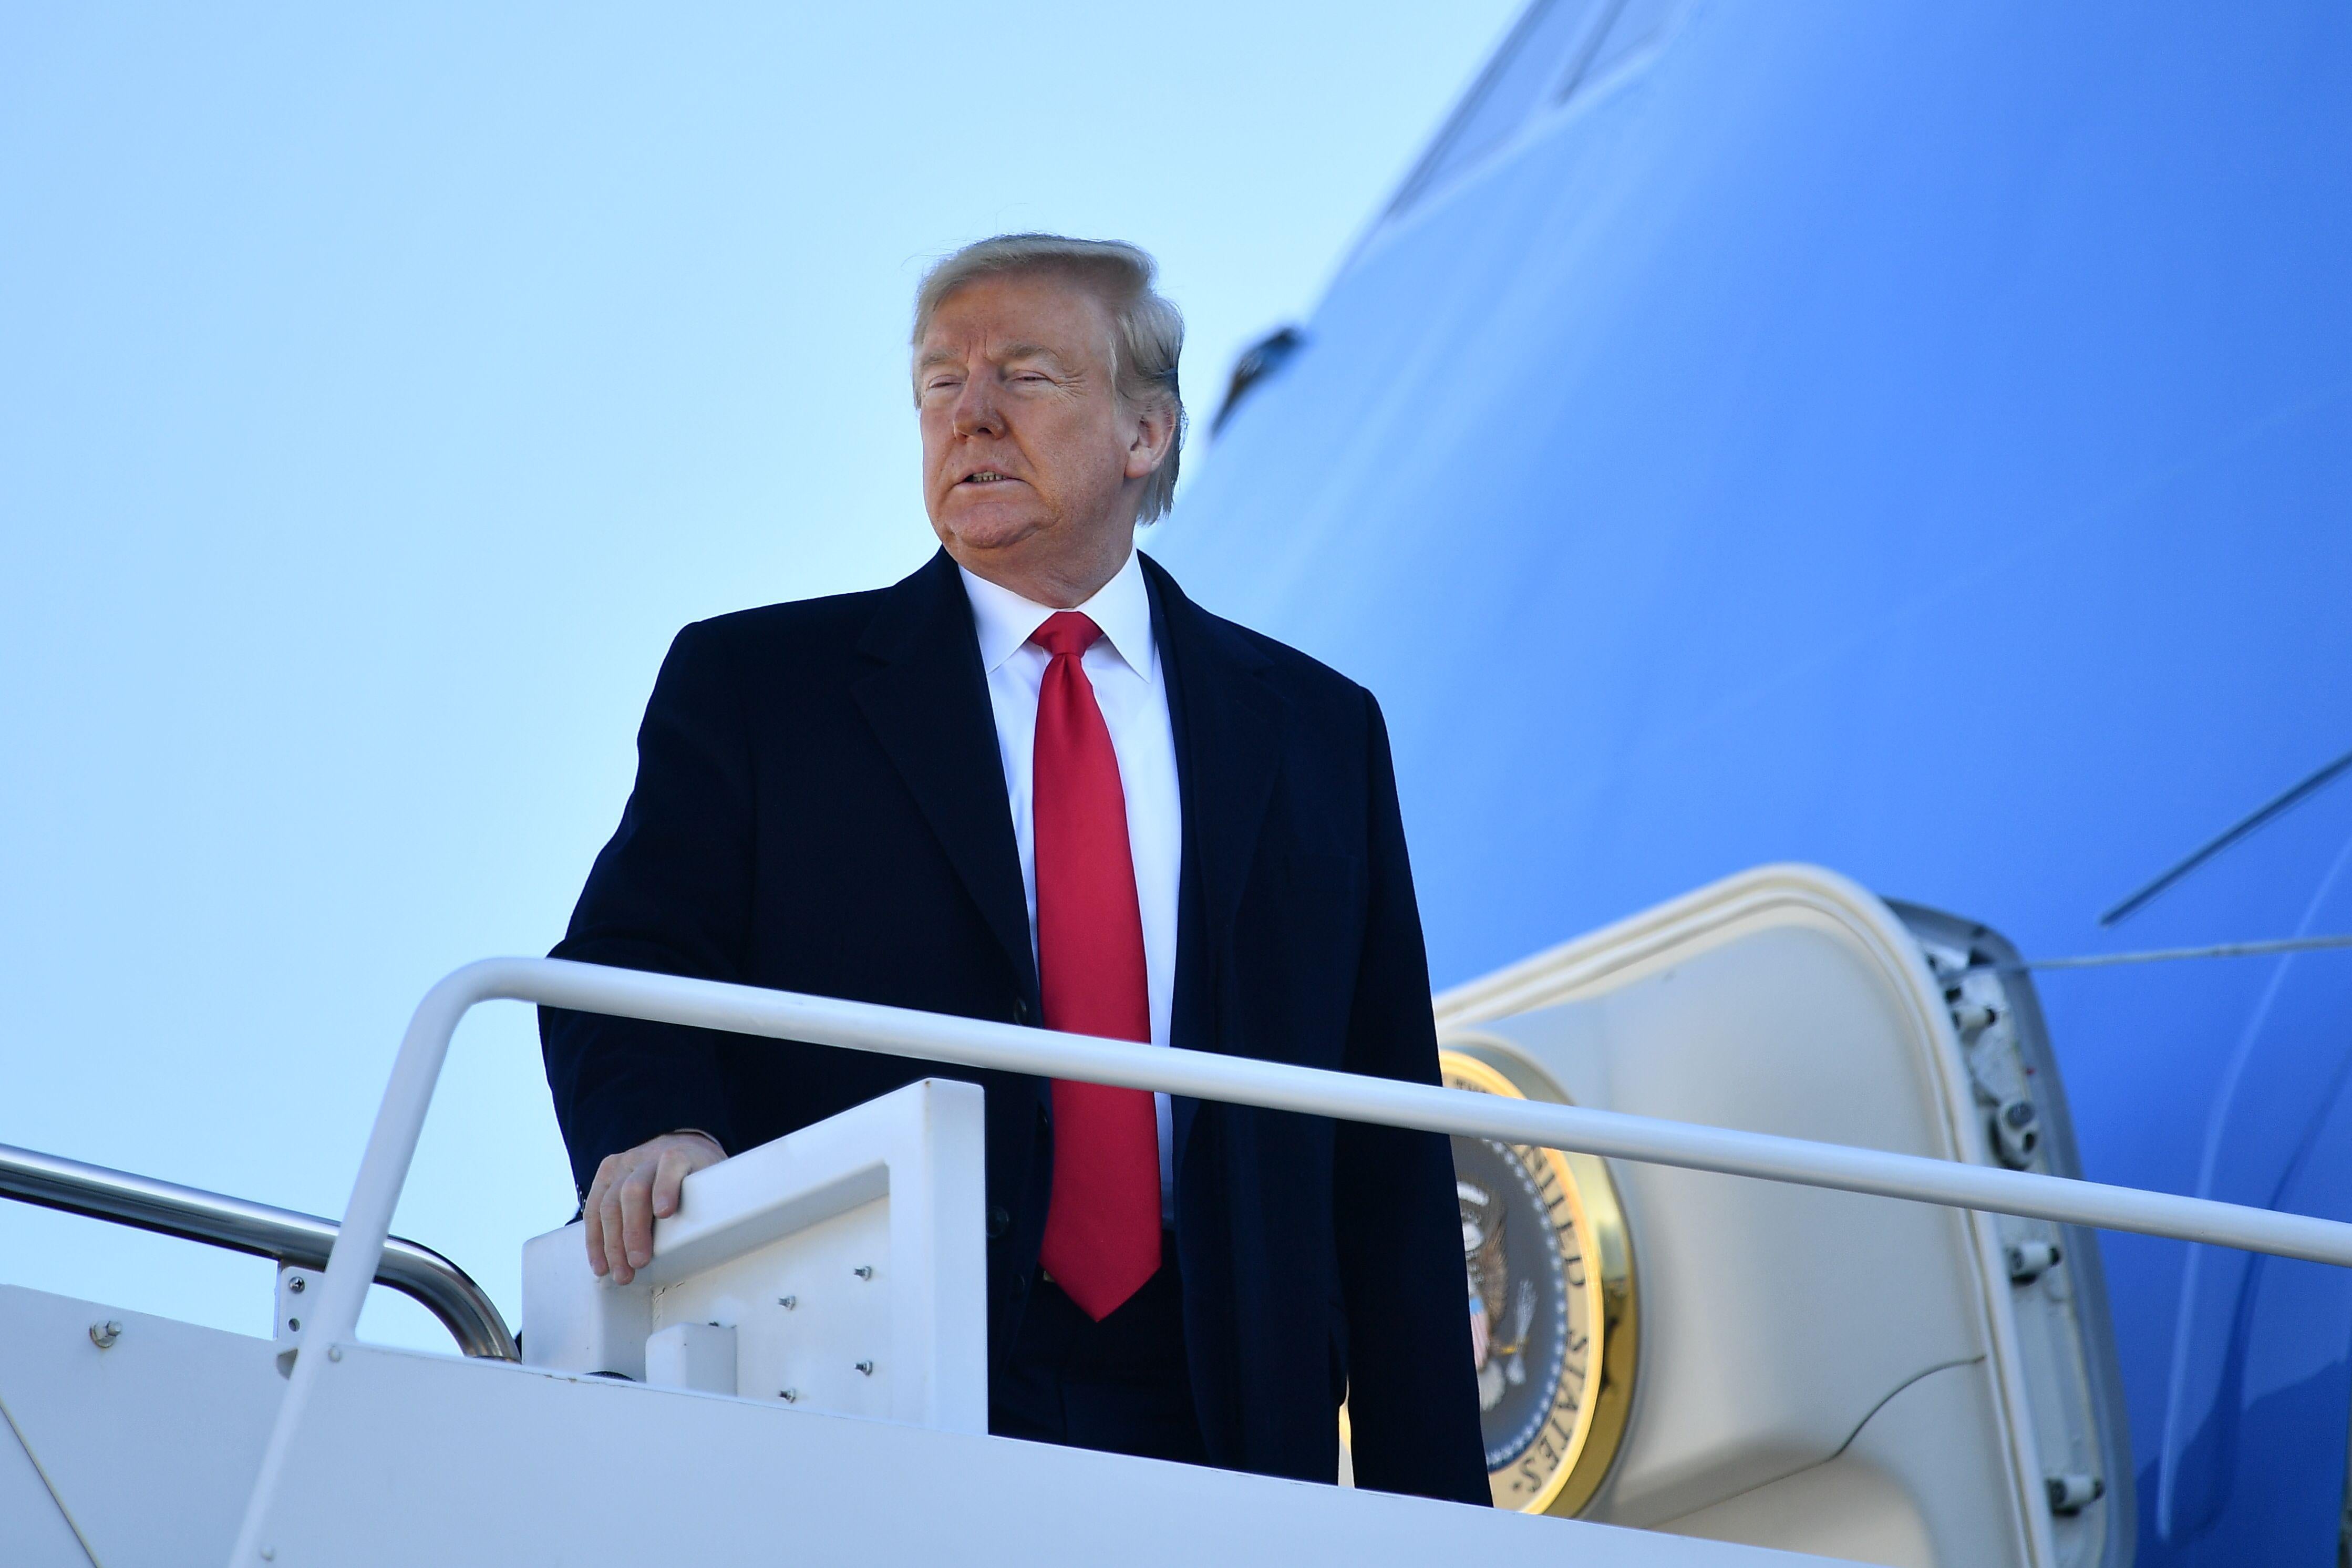 President Donald Trump boards Air Force One before departing from Andrews Air Force Base in Maryland on February 23, 2020.